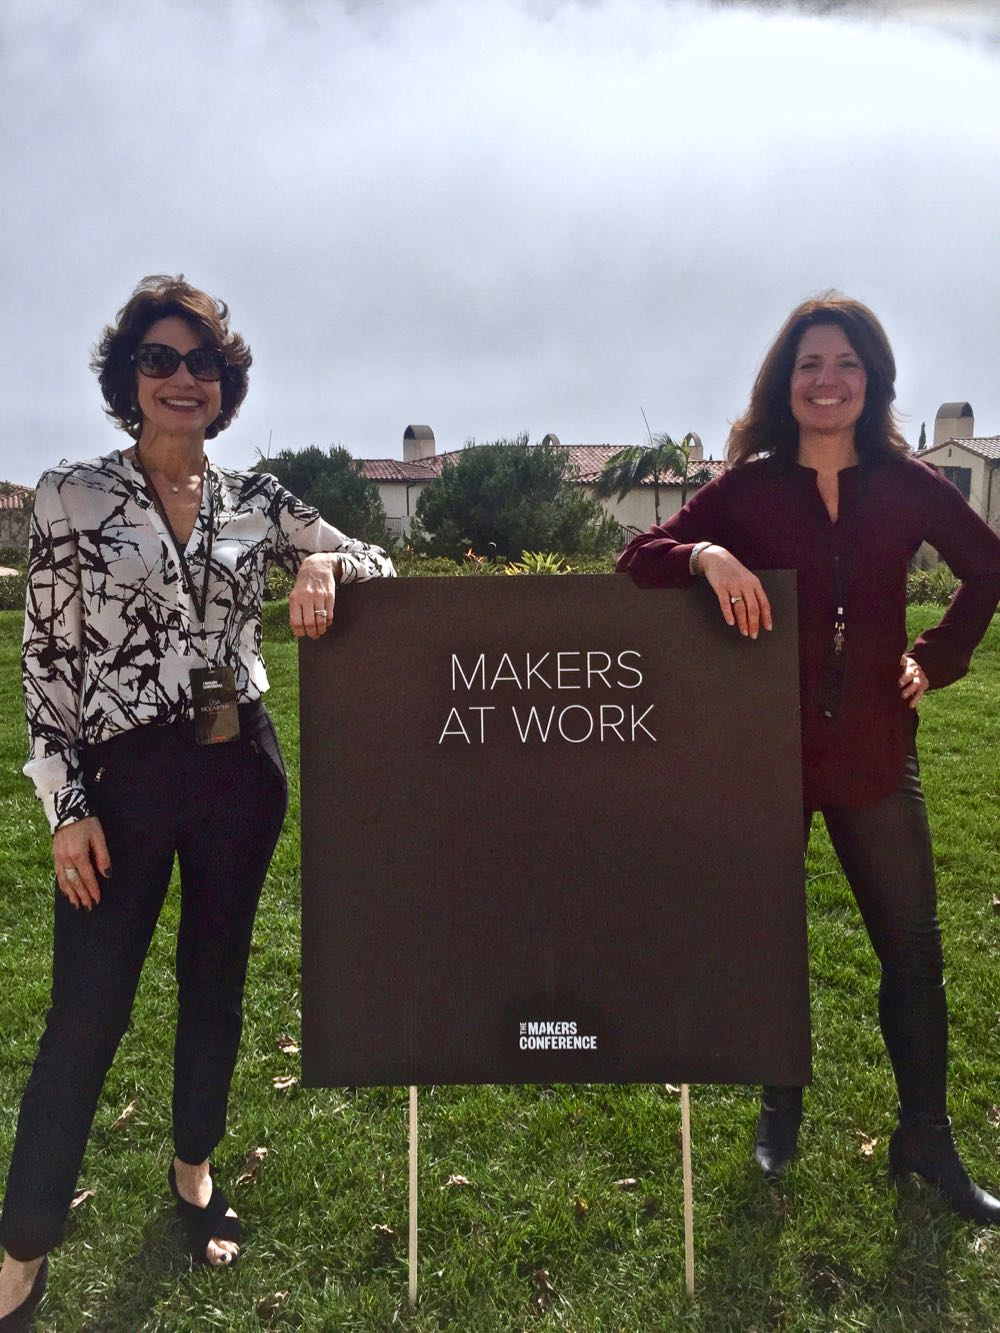 Fast Forward Co-Founders Lisa McCarthy and Wendy Leshgold smile at the camera while standing by the Maker's Conference sign that says Makers at Work